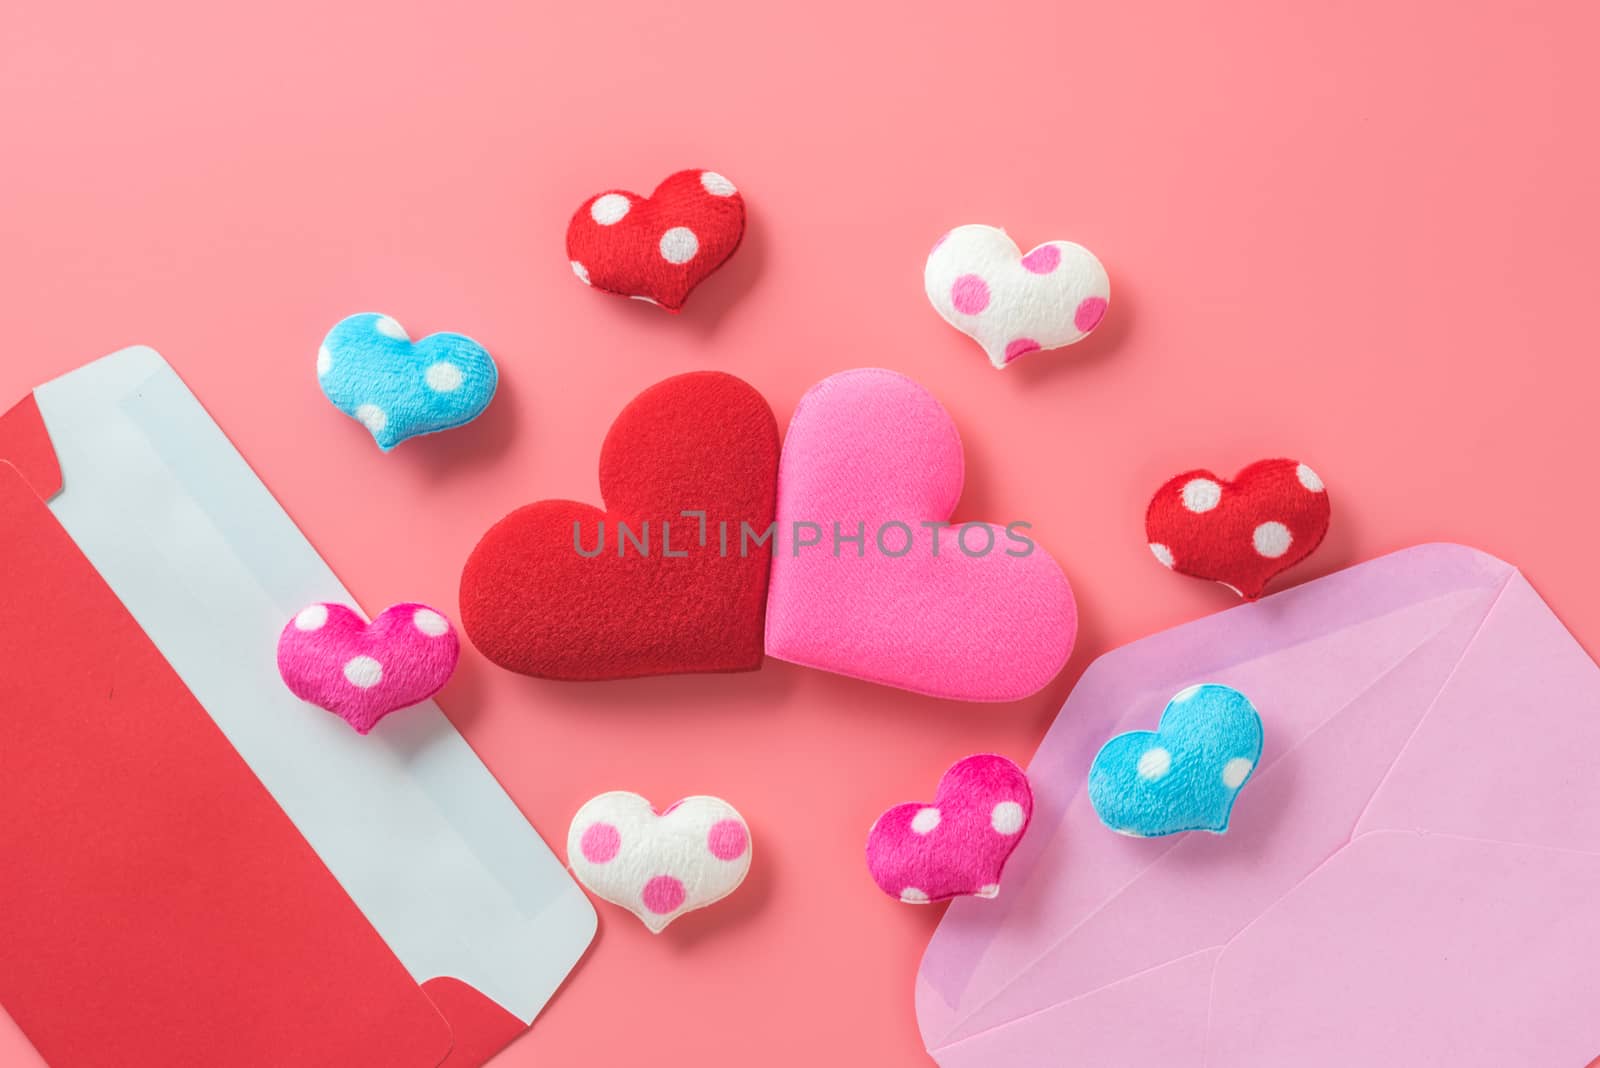 mini heart splash out from red and pink envelop , valentine concept